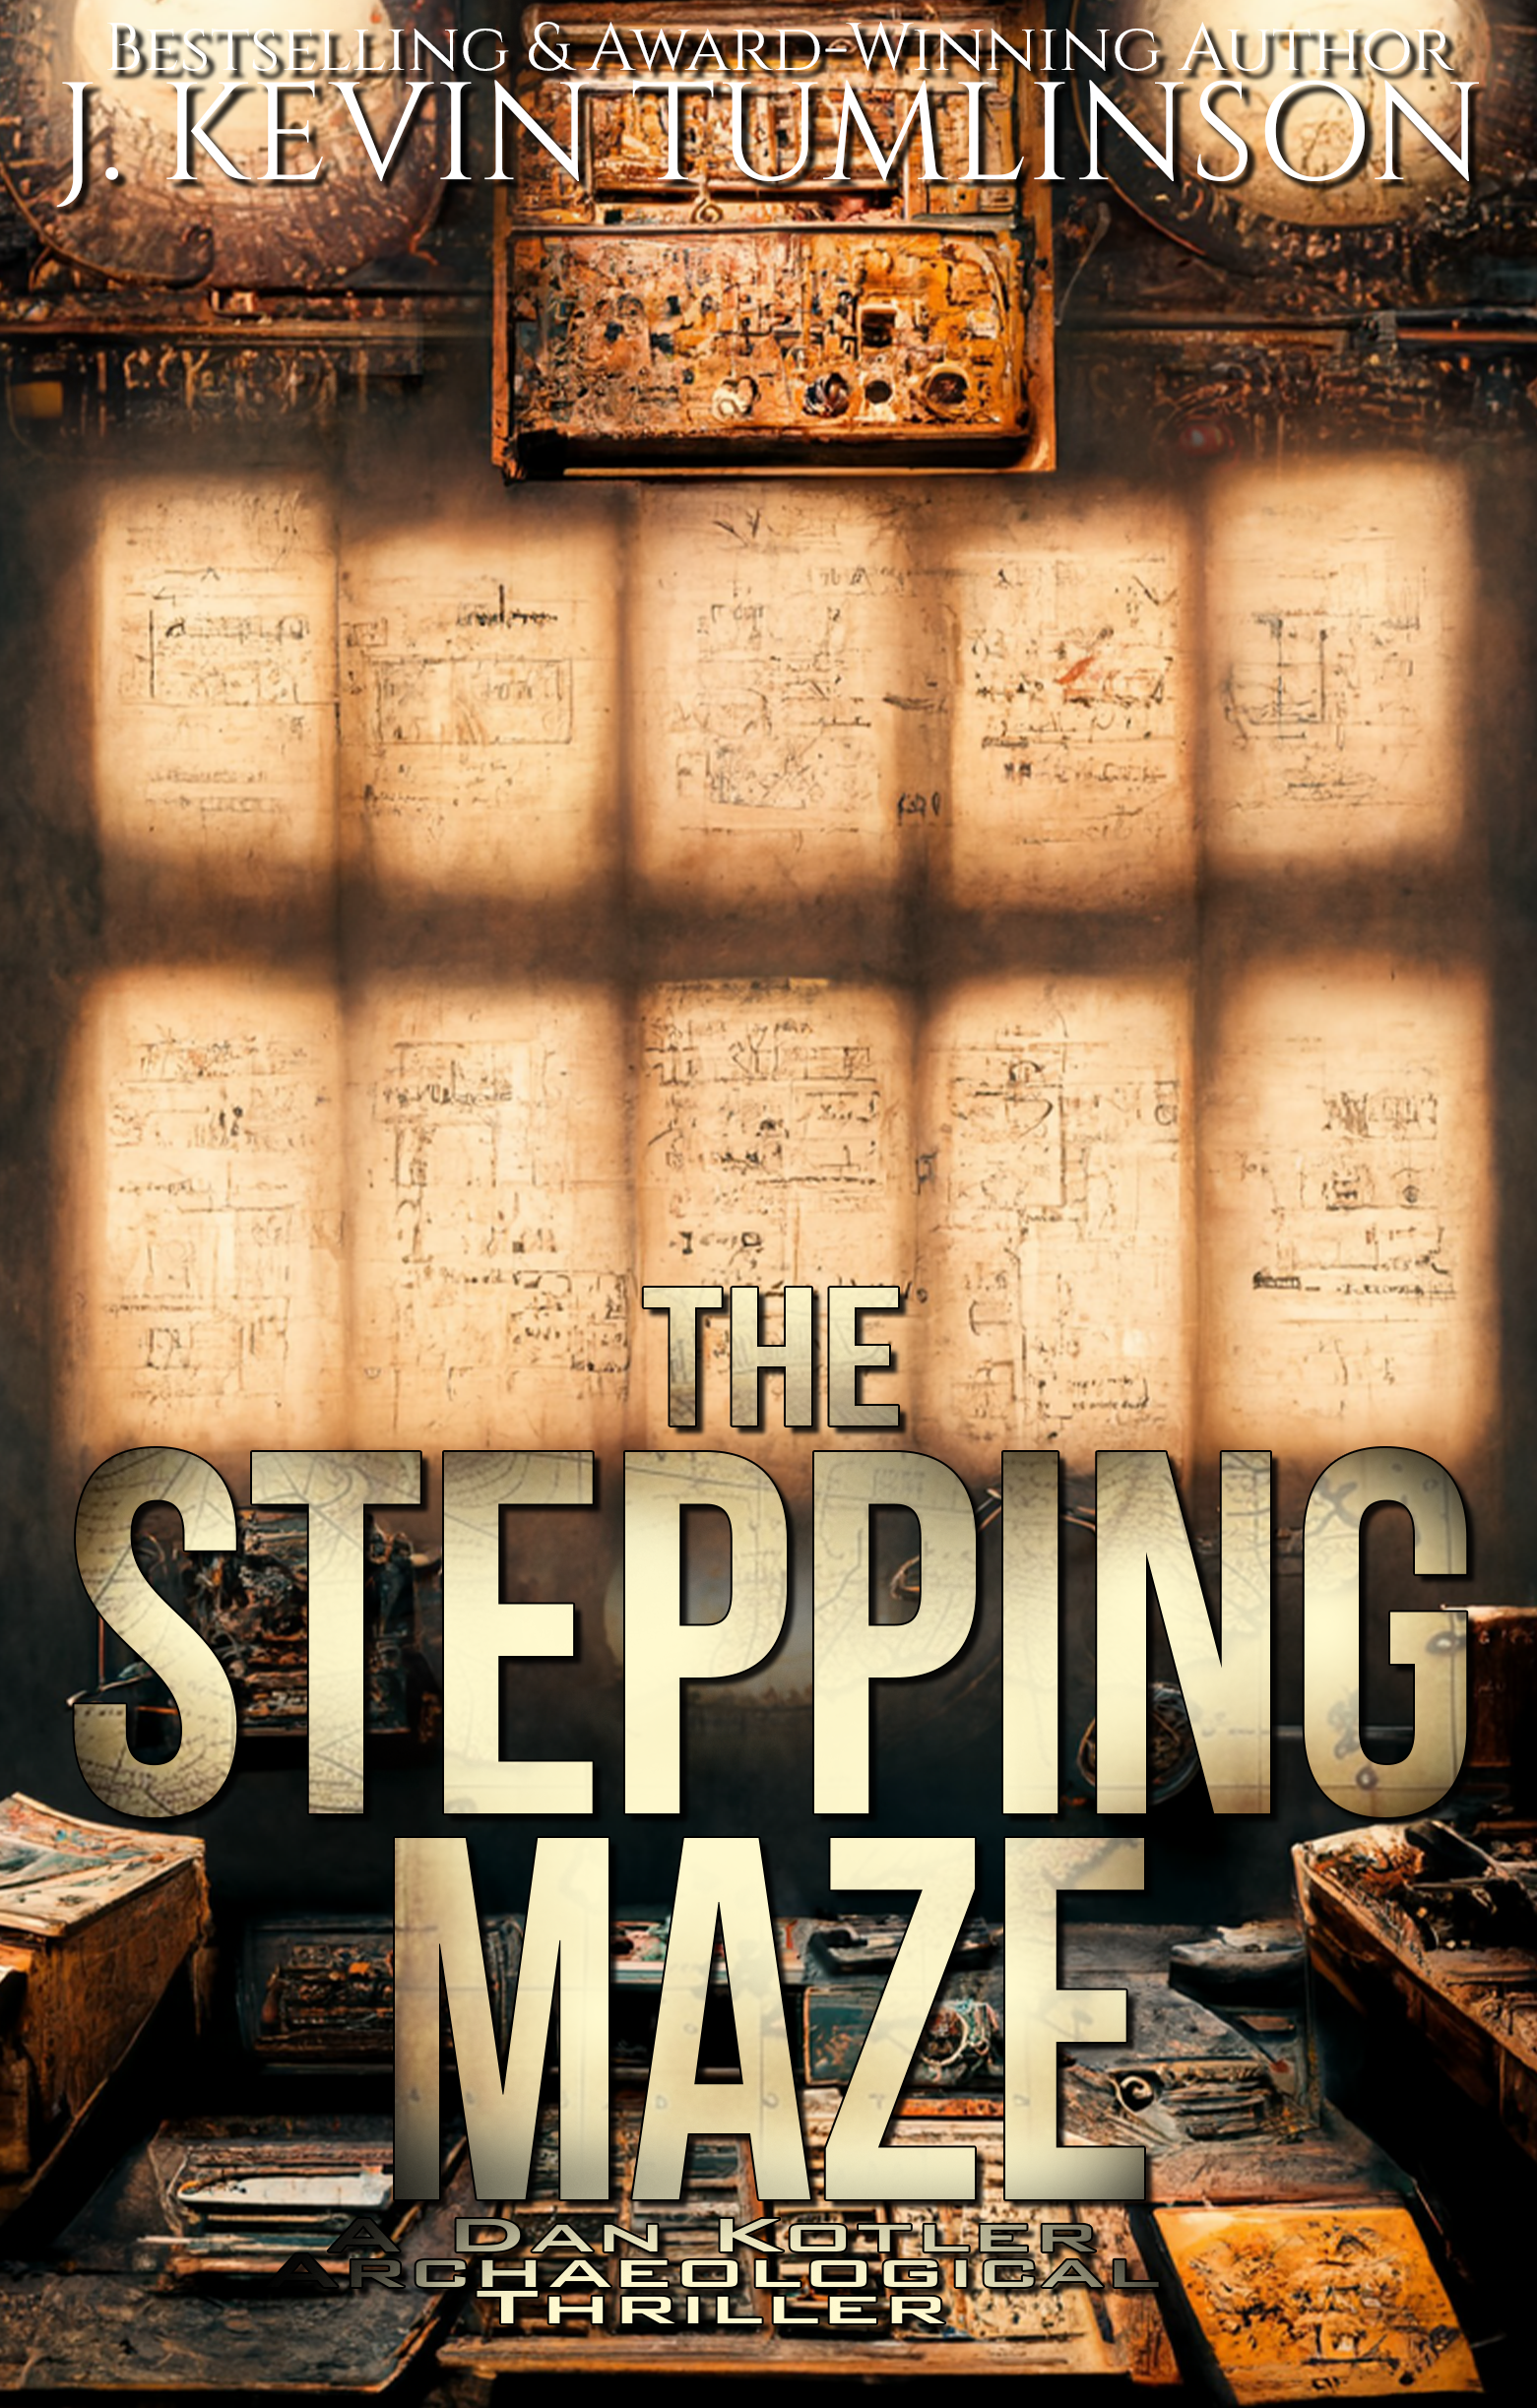 006_Stepping_Maze_10-2019_FRONT.png